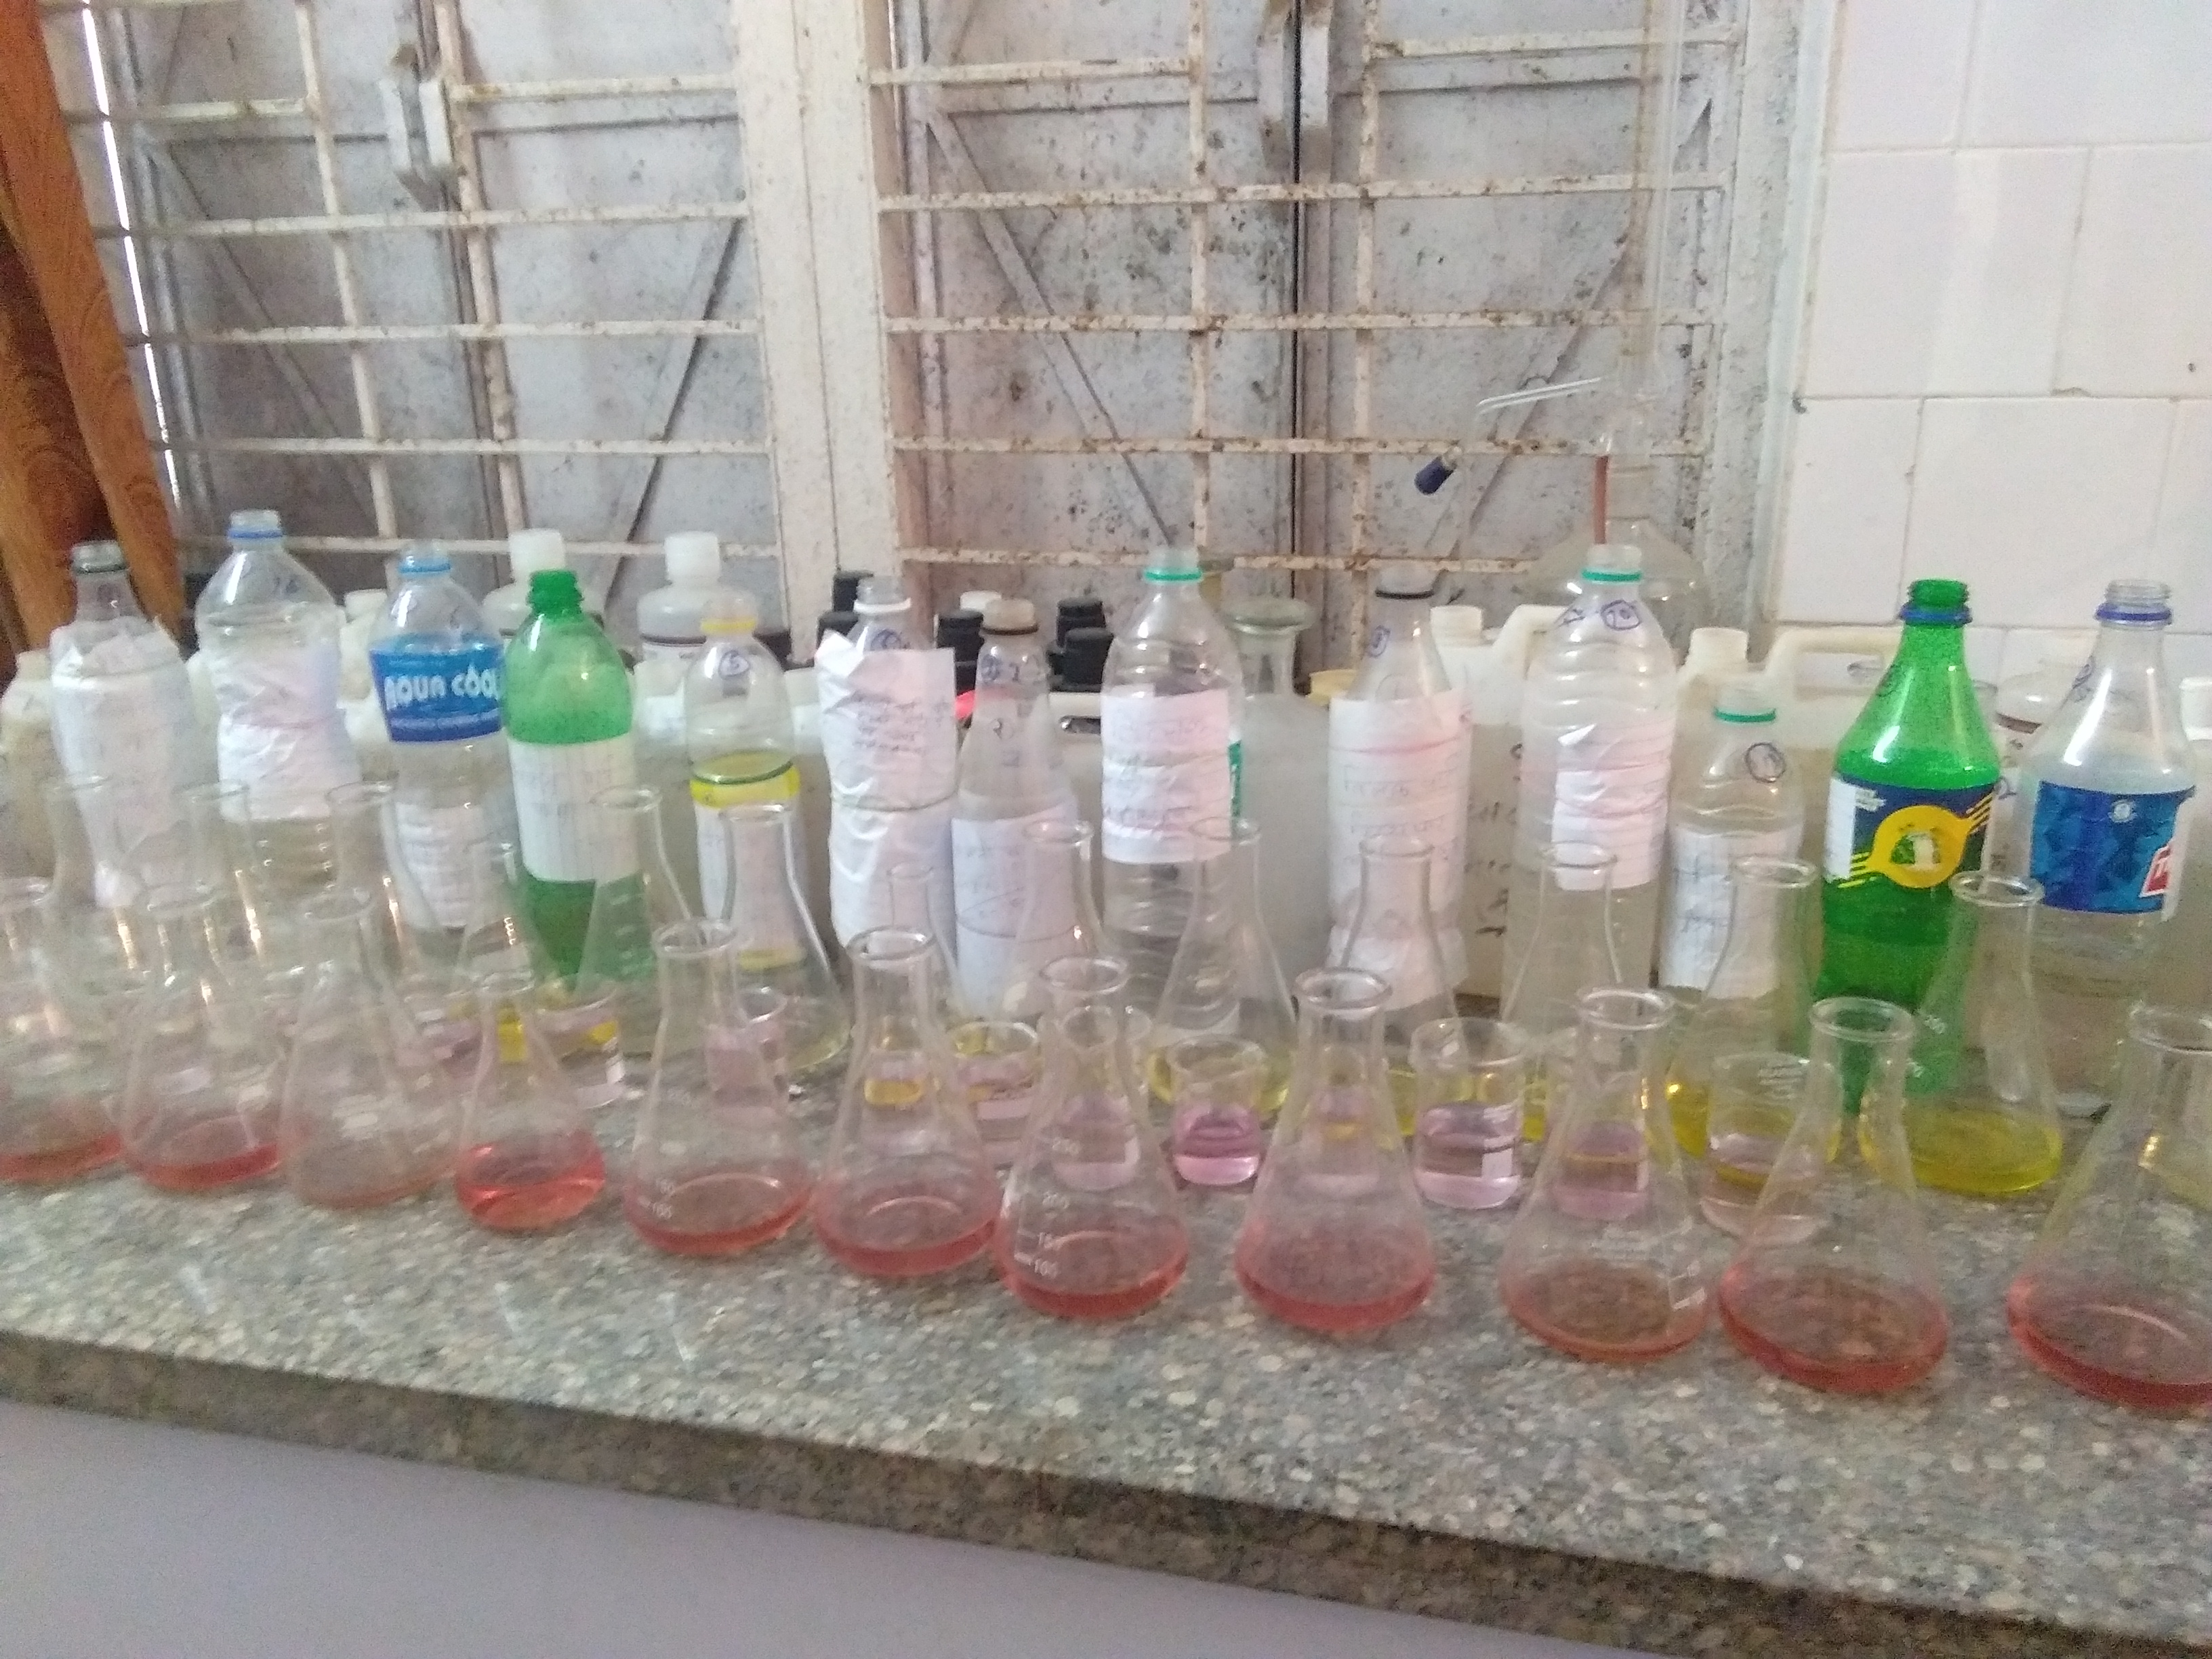 After the rainy days, the water samples started and the pretense of water treatment